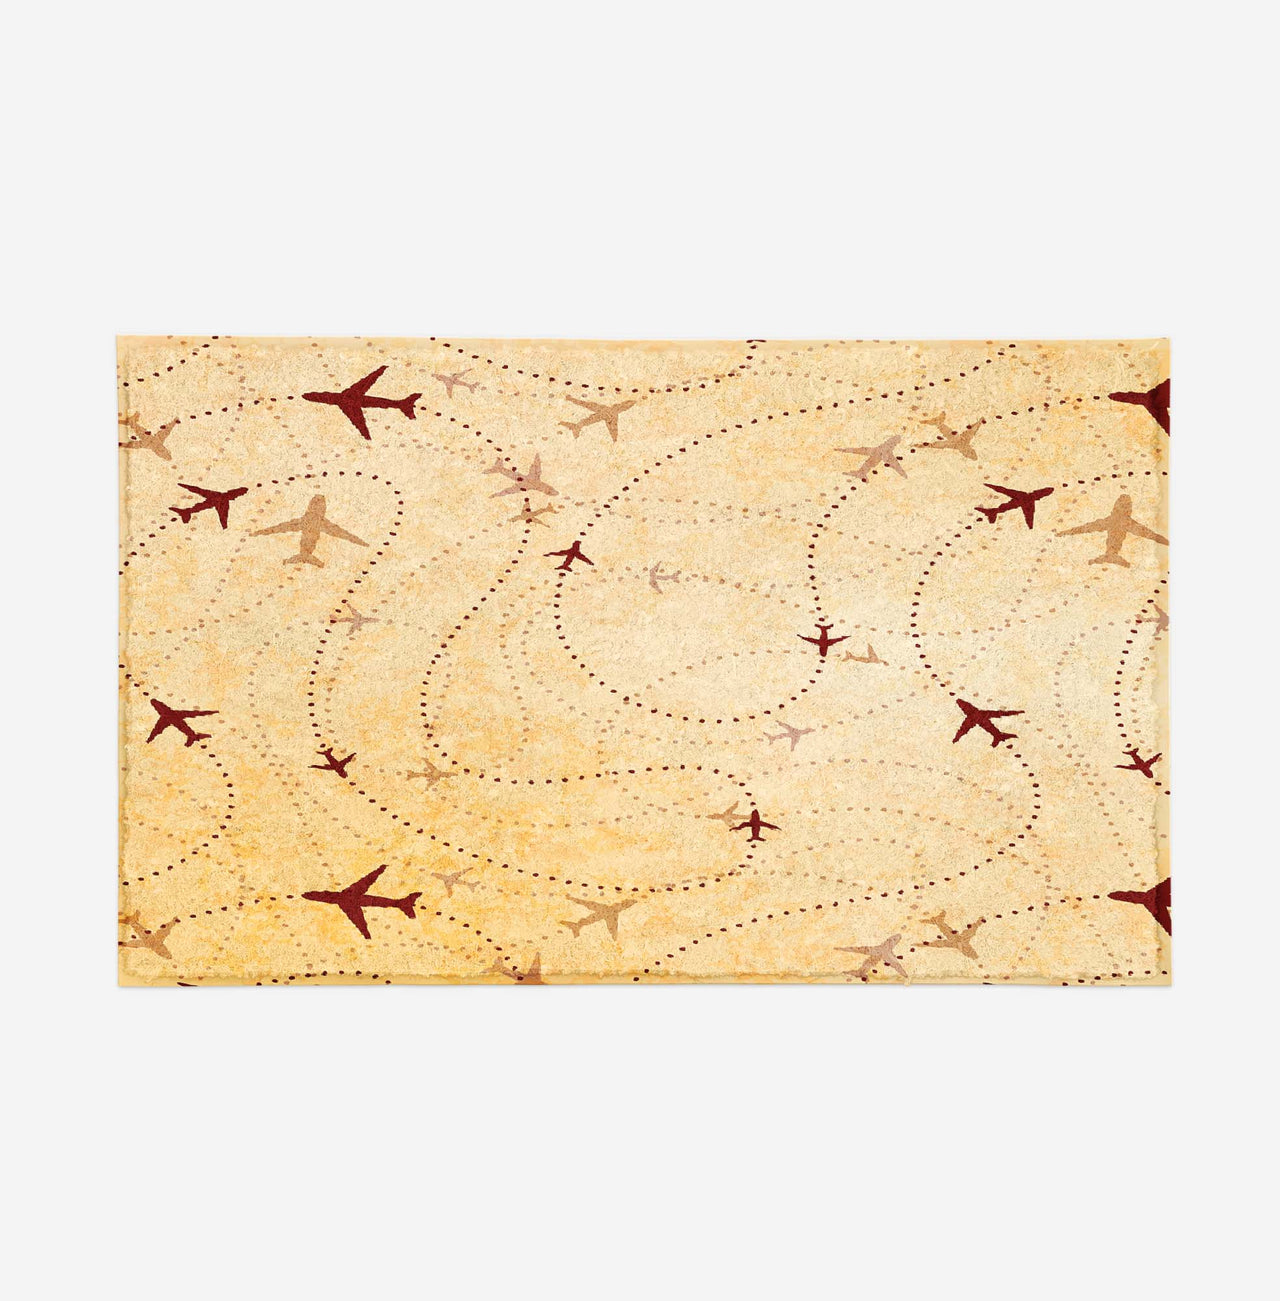 Vintage Travelling with Aircraft Designed Door Mats